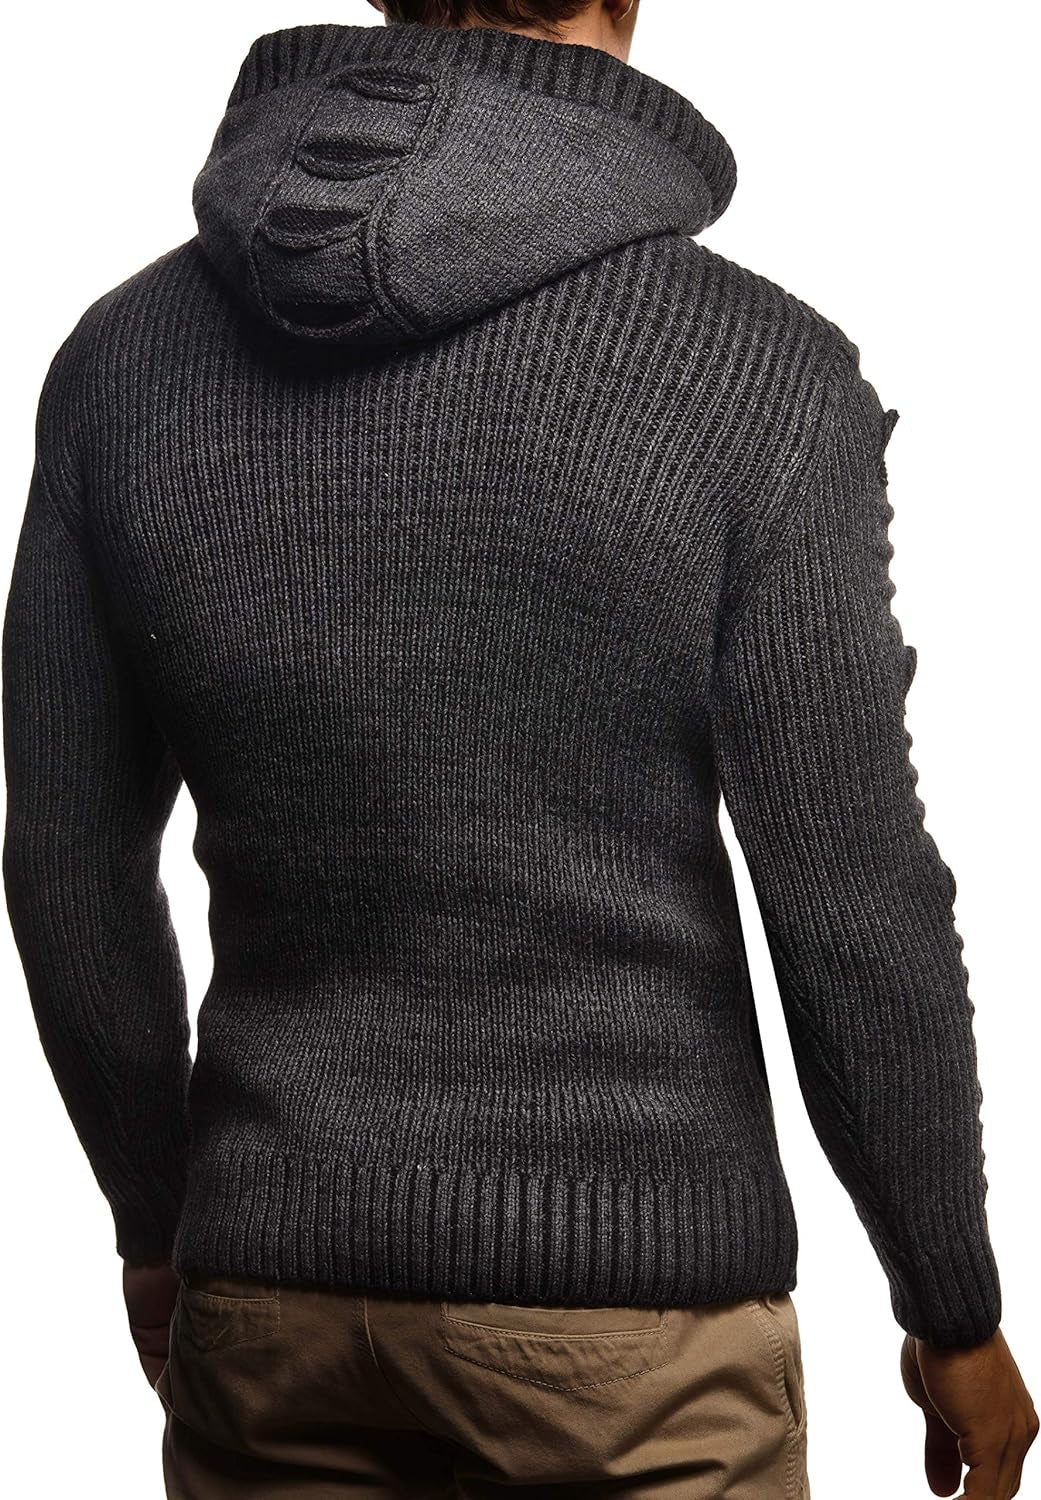 Men'S Stylish Knit Sweater with Buttons | Knitted Sweatshirt Pullover with Hood | Warm for Winter | LN5605